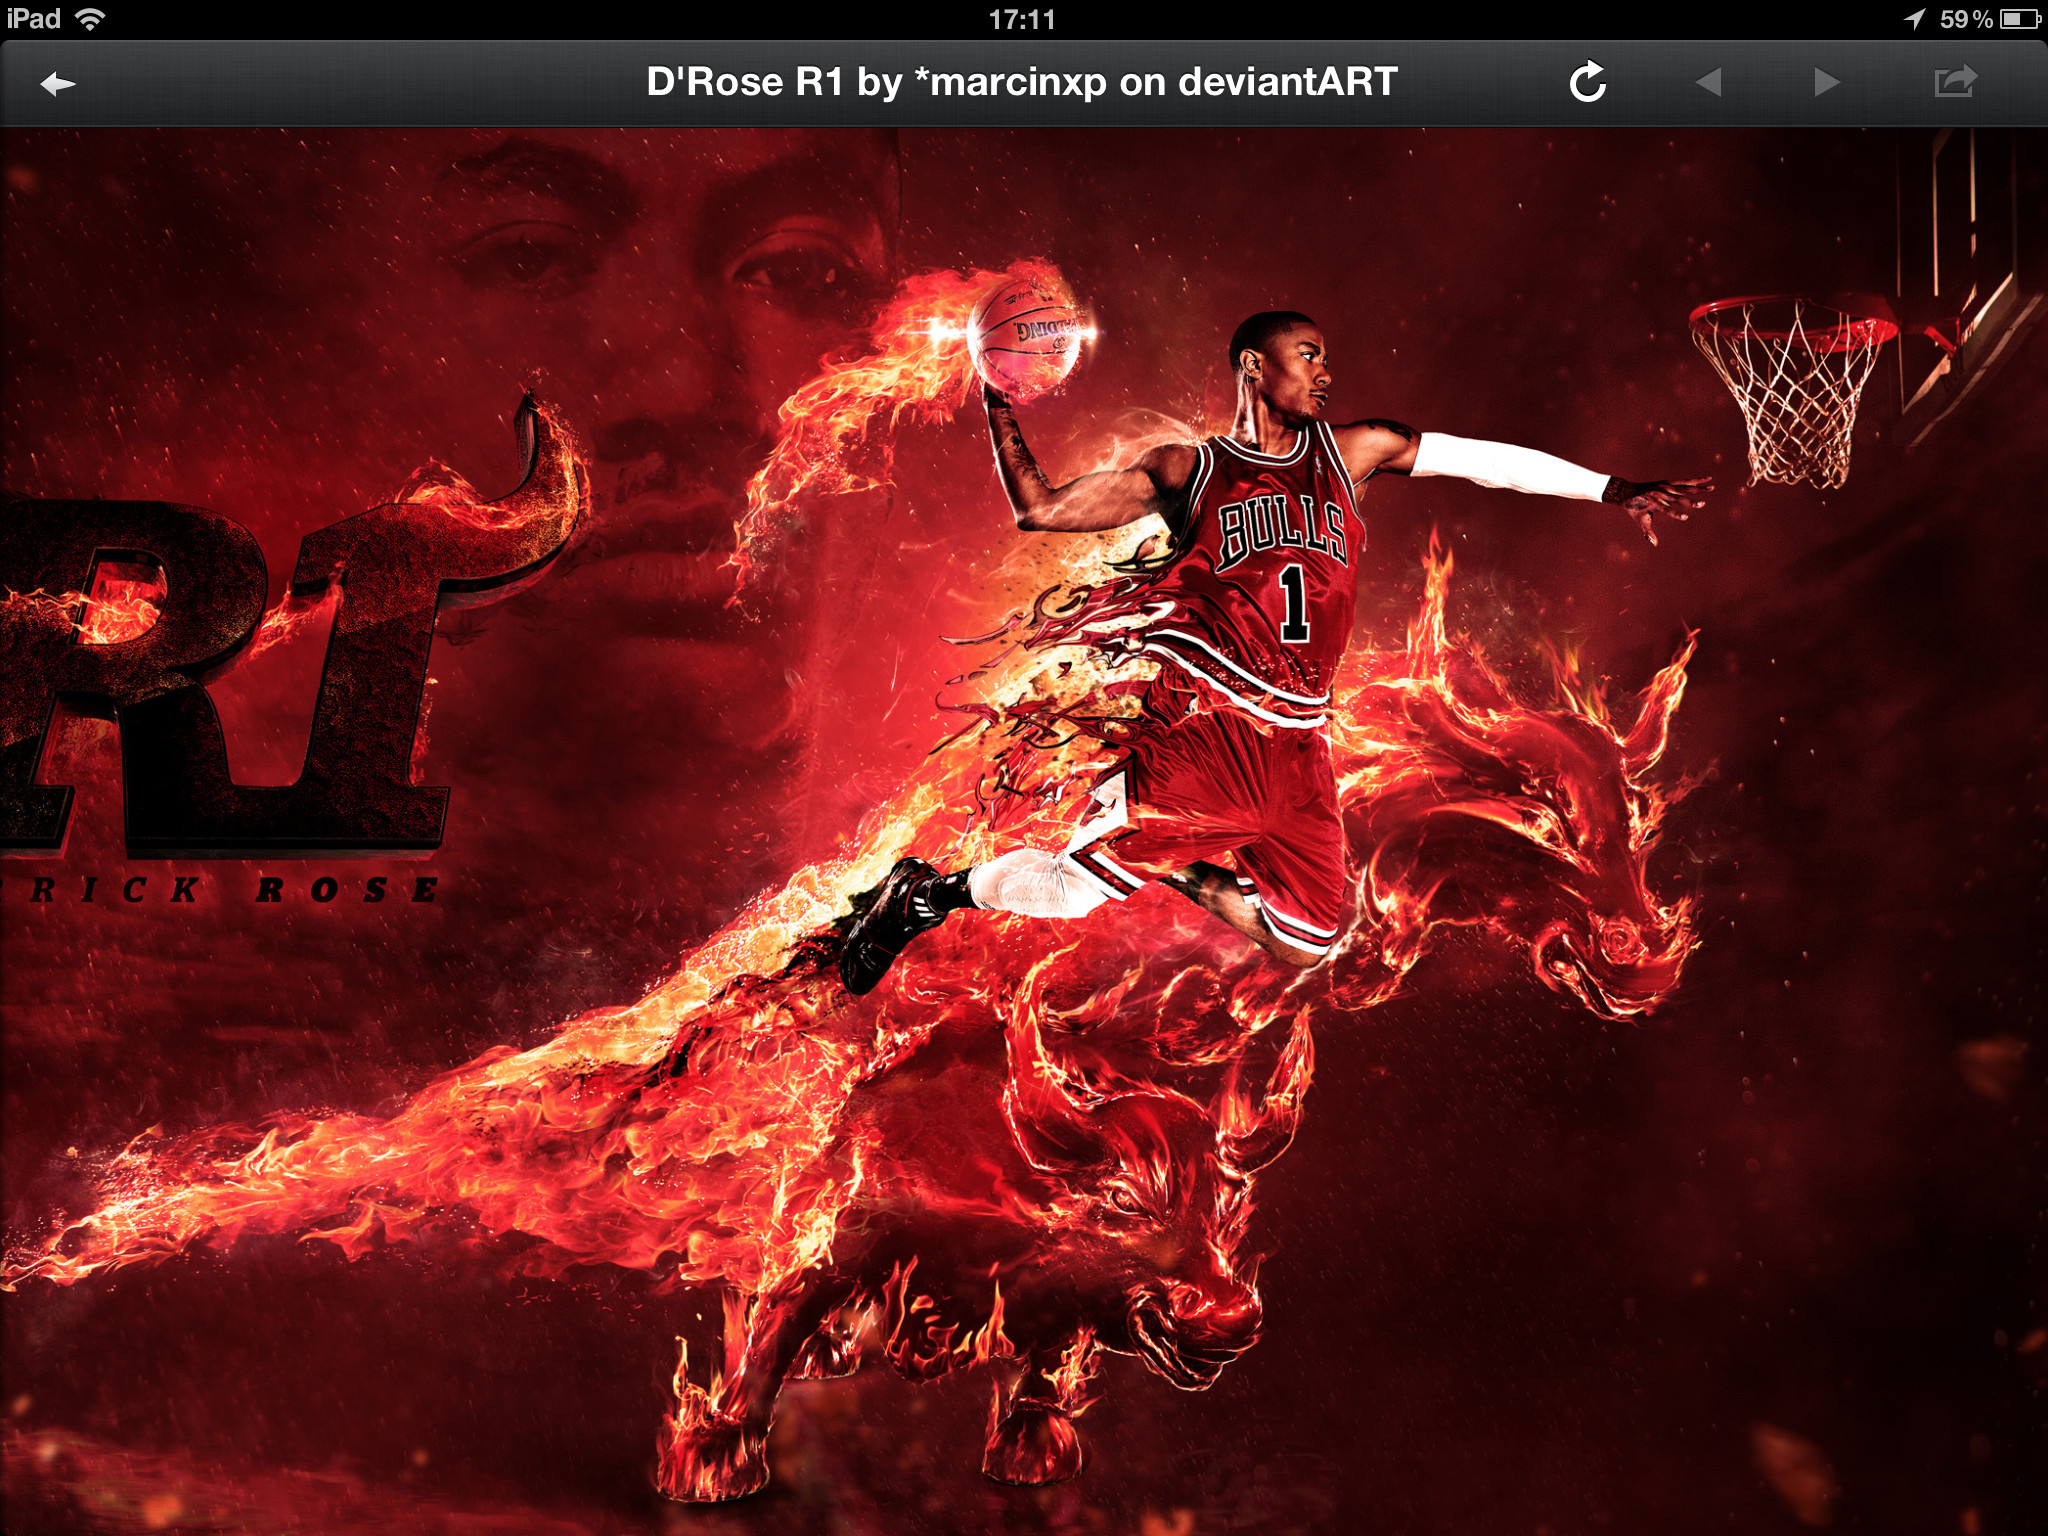 2048x1536 Derrick Rose Bulls HD Wallpaper For Macs with ID 2566 on Sports category in  Amazing Wallpaperz. Derrick Rose Bulls HD Wallpaper For Macs is one from  many ...